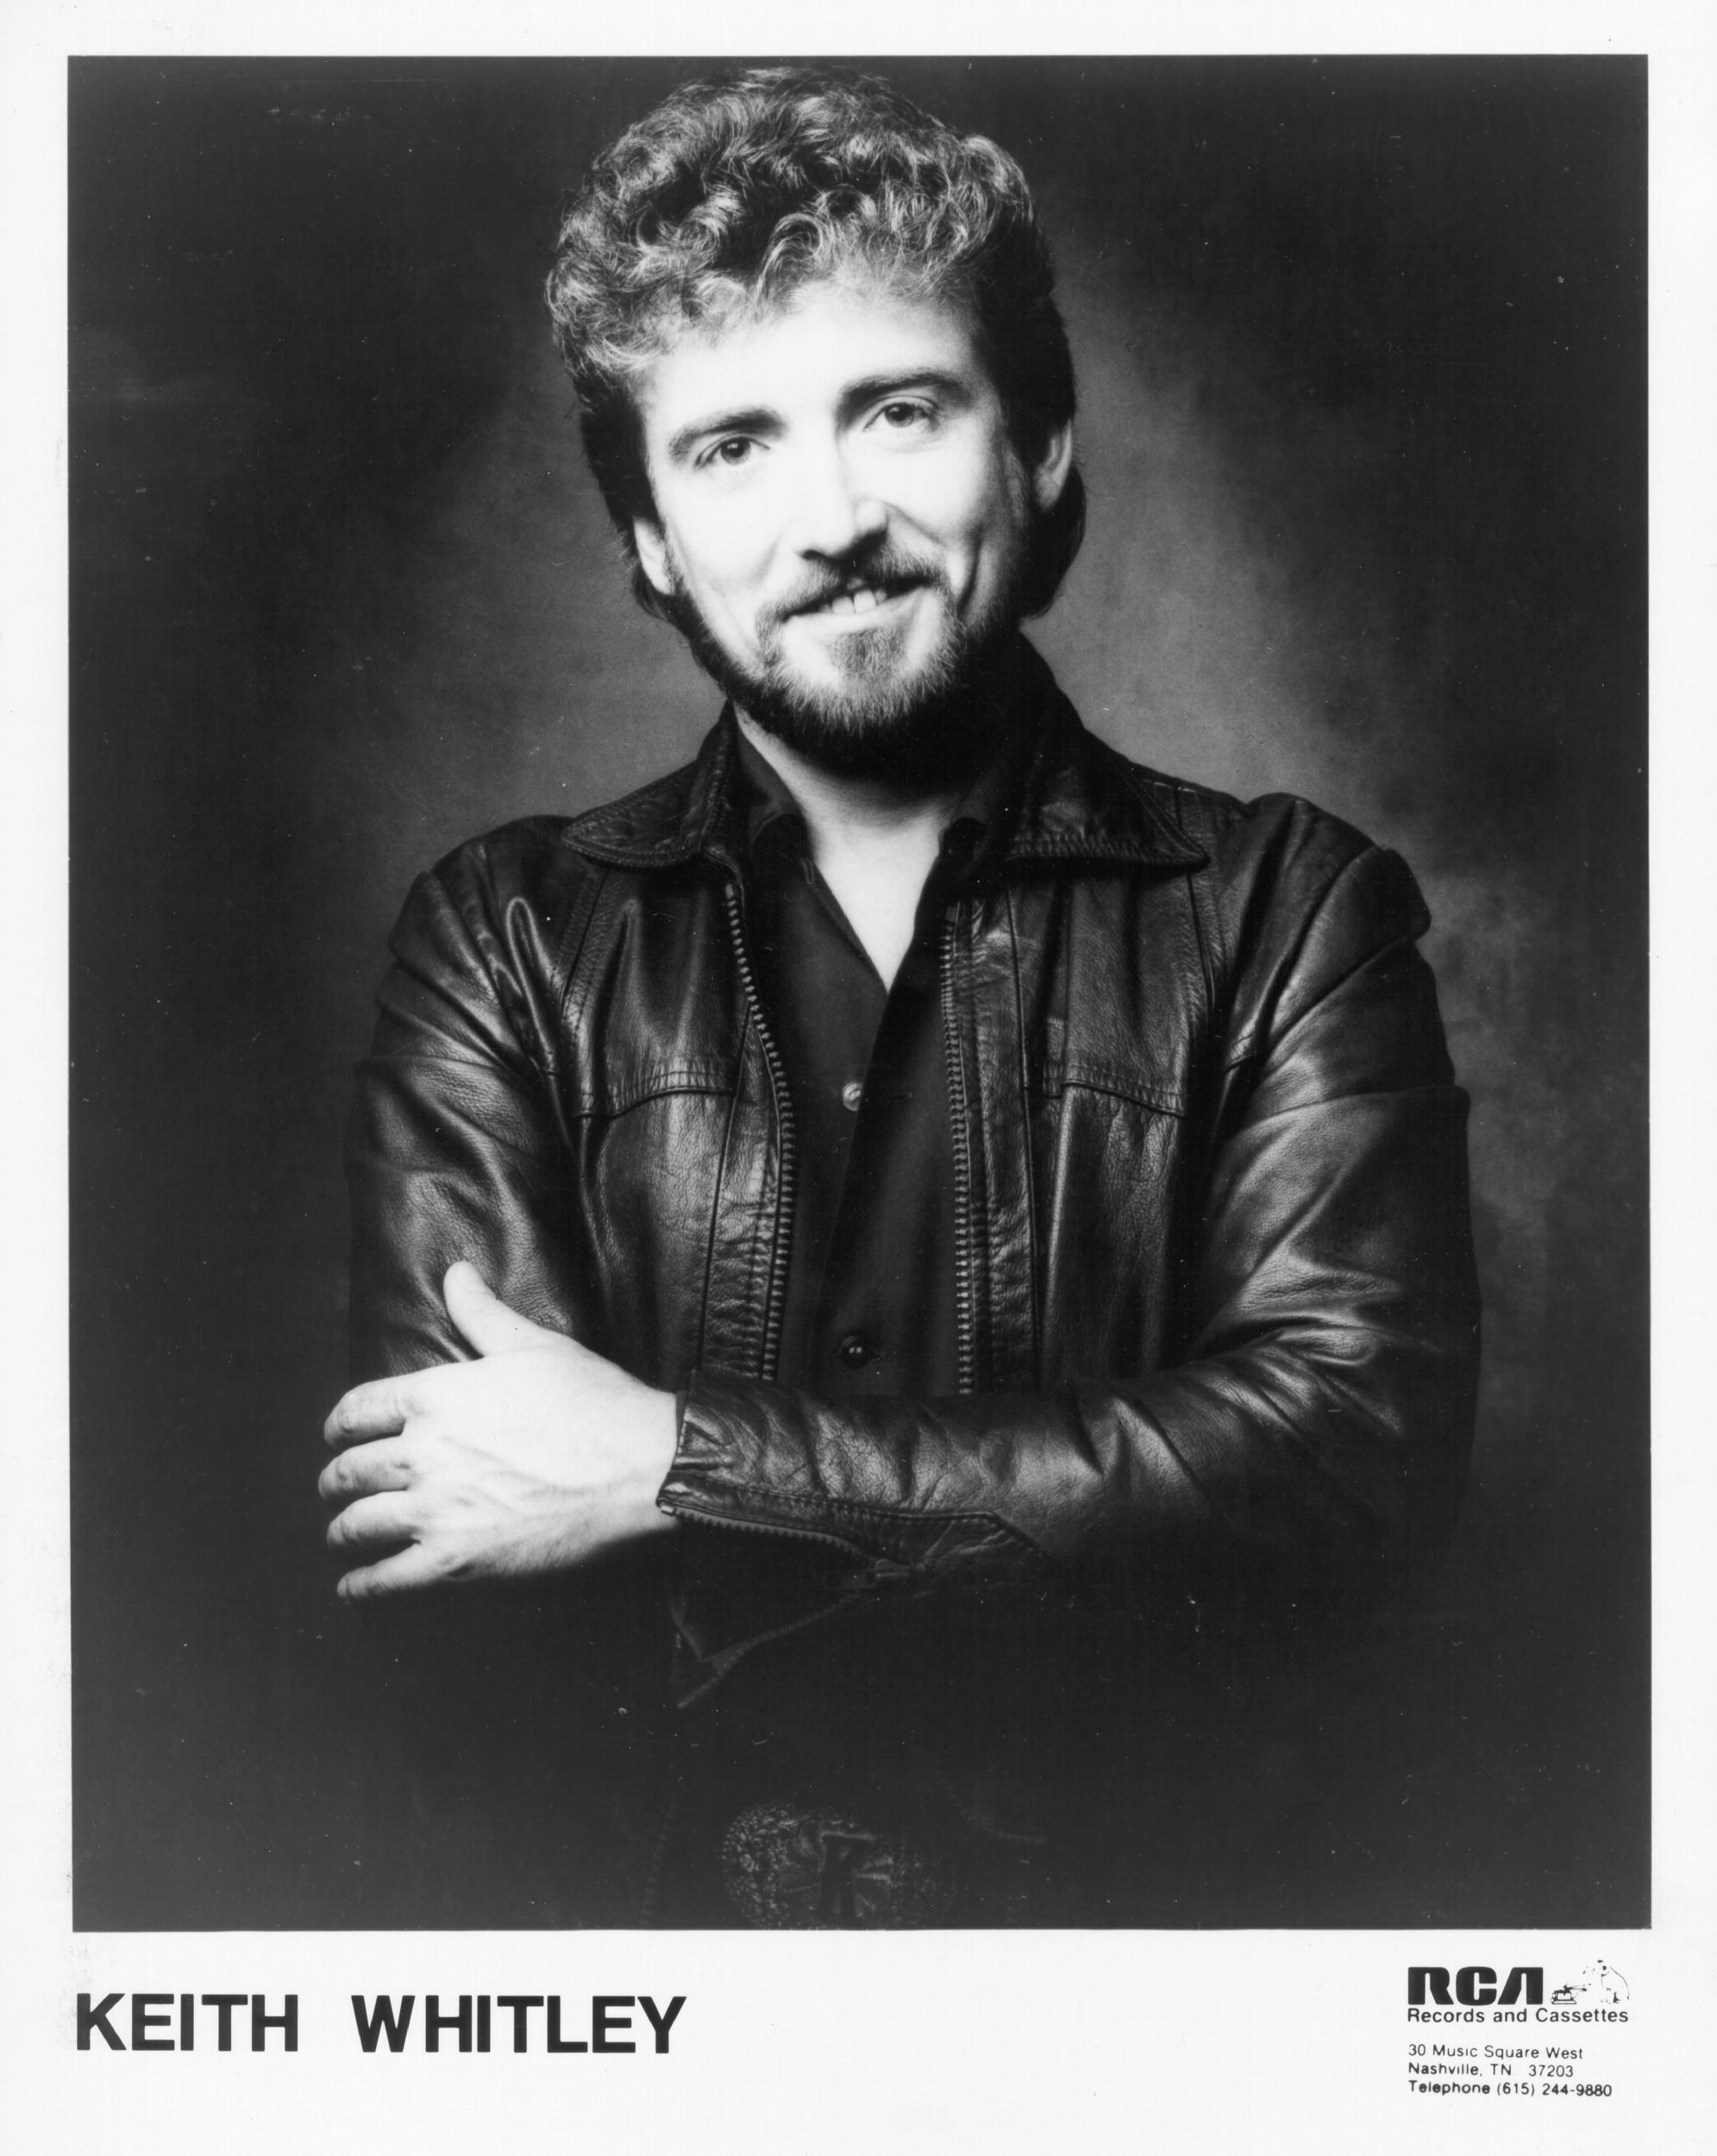 <p>In his too-short career, Keith Whitley charted 12 songs on the Billboard charts before his untimely death in 1989. A neo traditionalist who helped set the tone for artists like Alan Jackson and George Strait, Whitley’s classic song “When You Say Nothing At All” is Hall of Fame worthy on its own. </p><p><a href='https://www.msn.com/en-us/community/channel/vid-cj9pqbr0vn9in2b6ddcd8sfgpfq6x6utp44fssrv6mc2gtybw0us'>Follow us on MSN to see more of our exclusive entertainment content.</a></p>